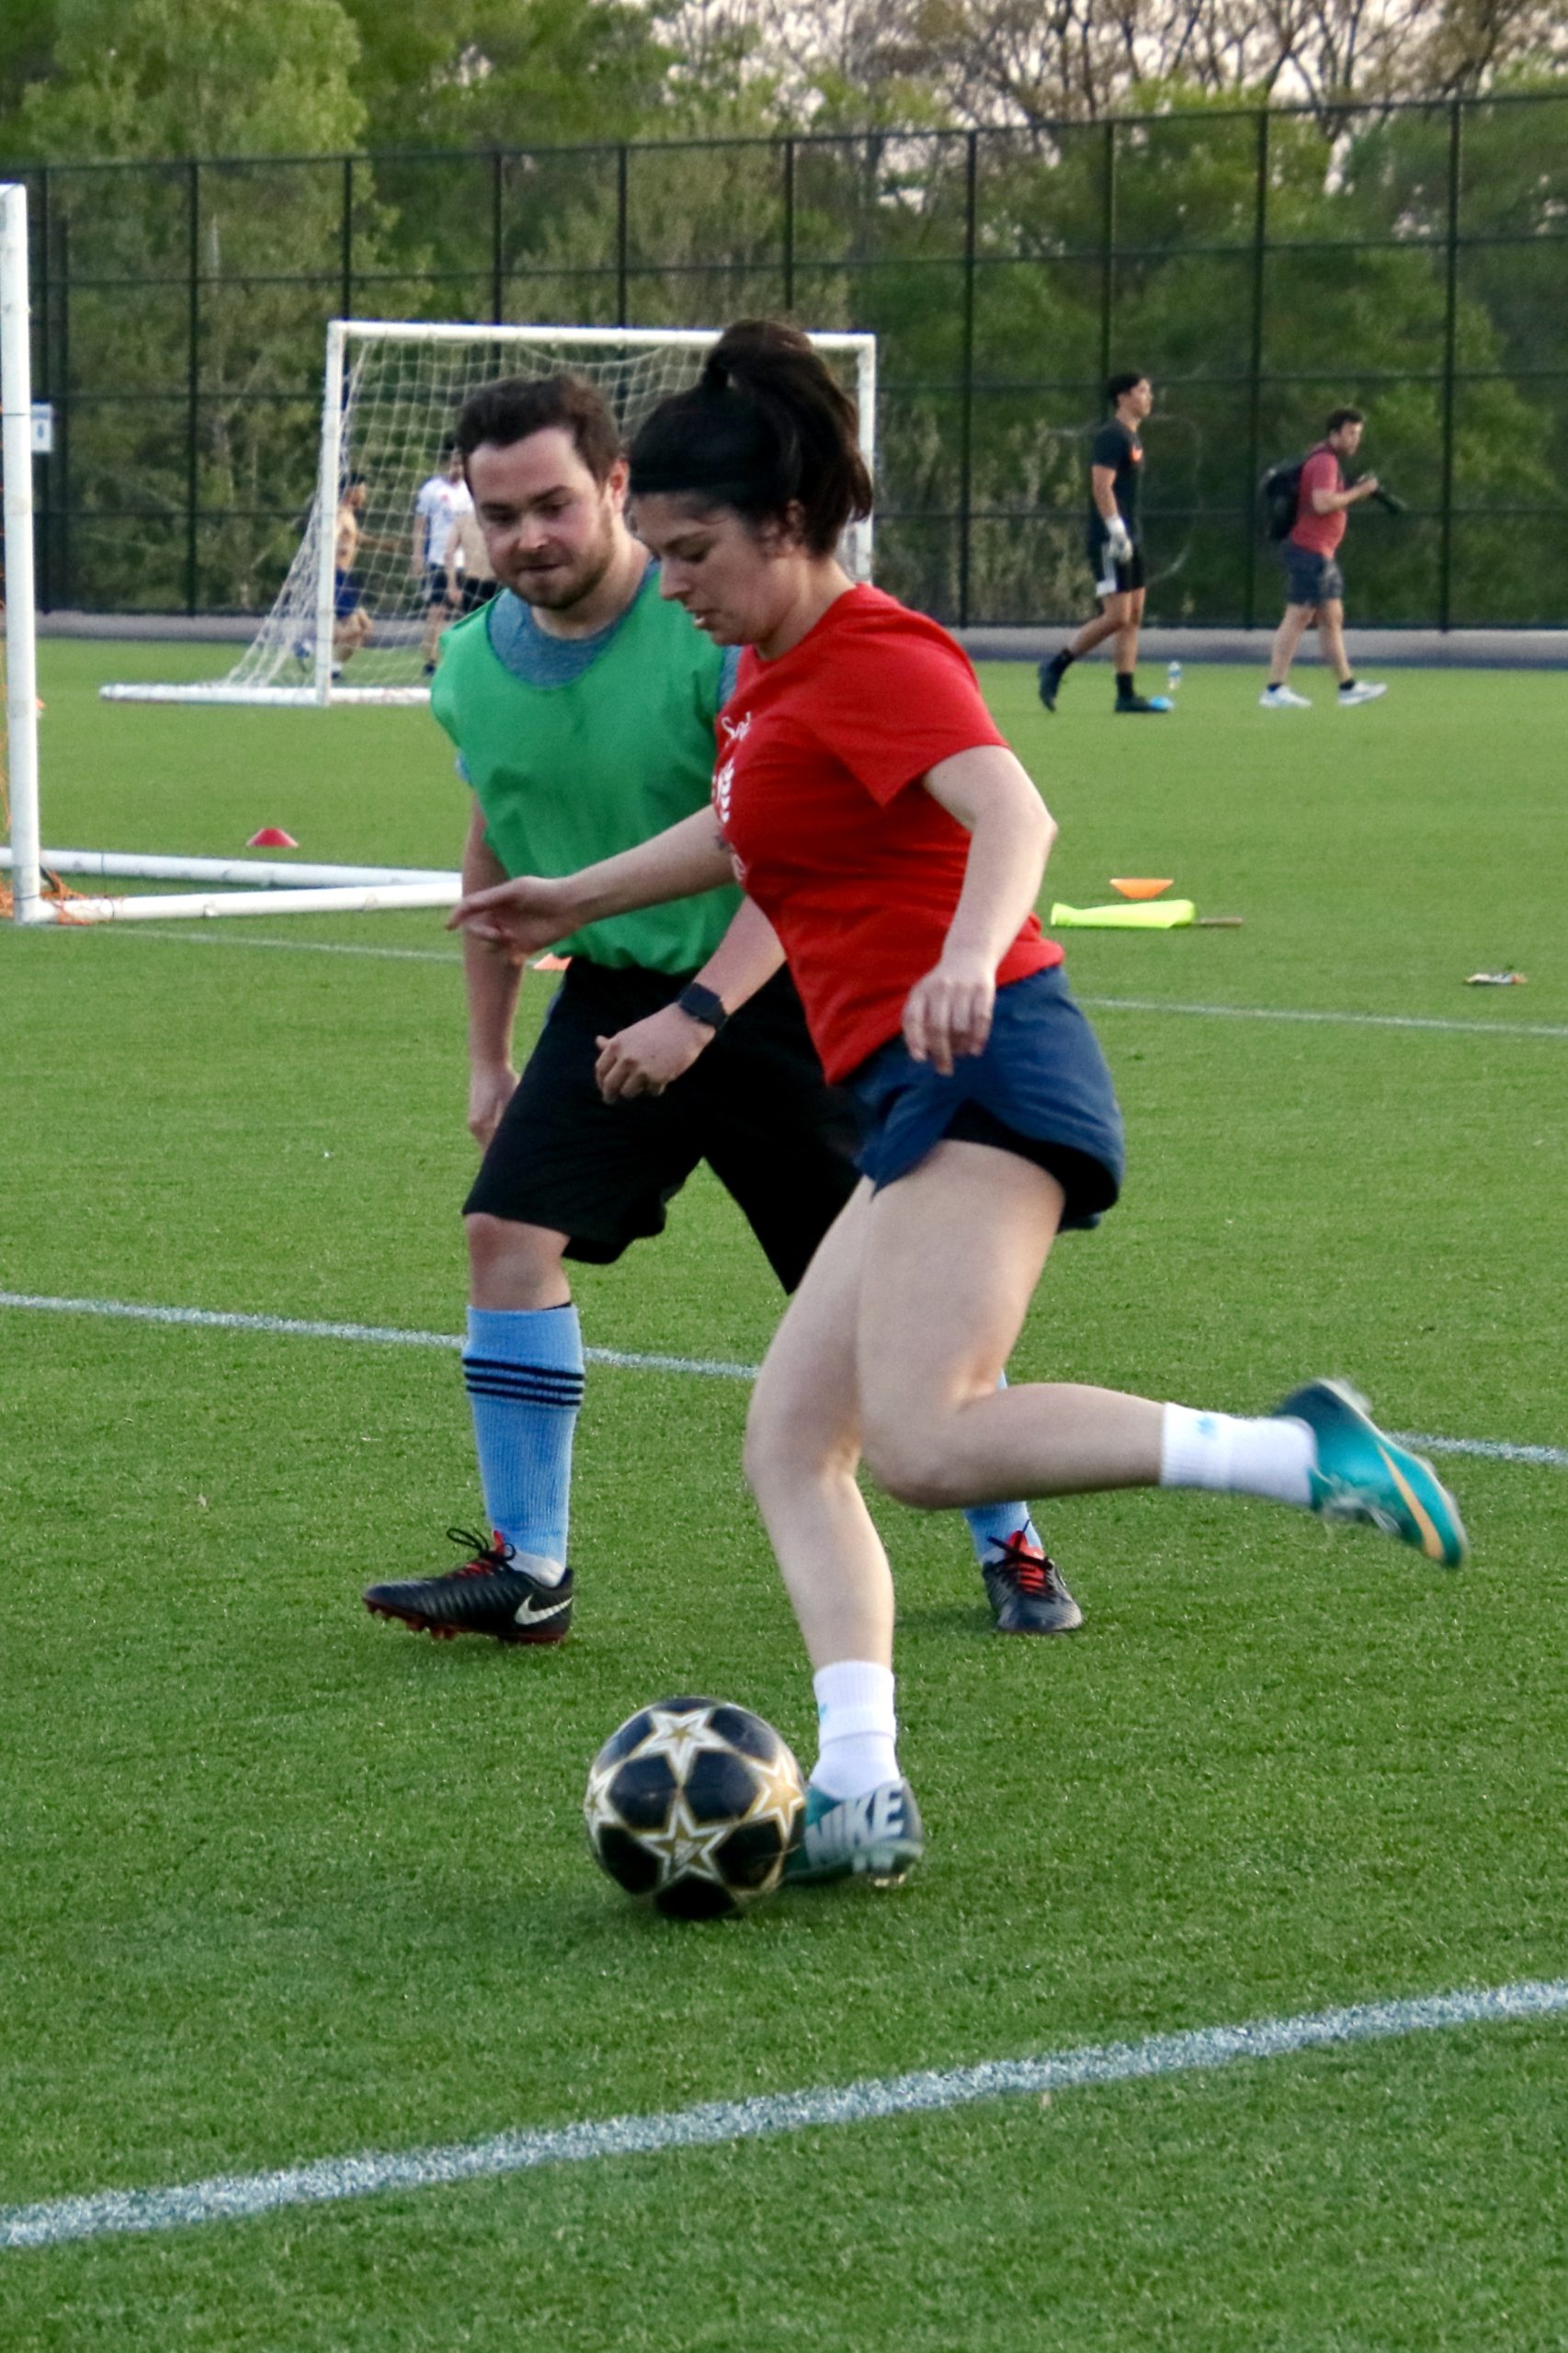 Chloe kicking a soccer ball on a field with an opposing team member behind her